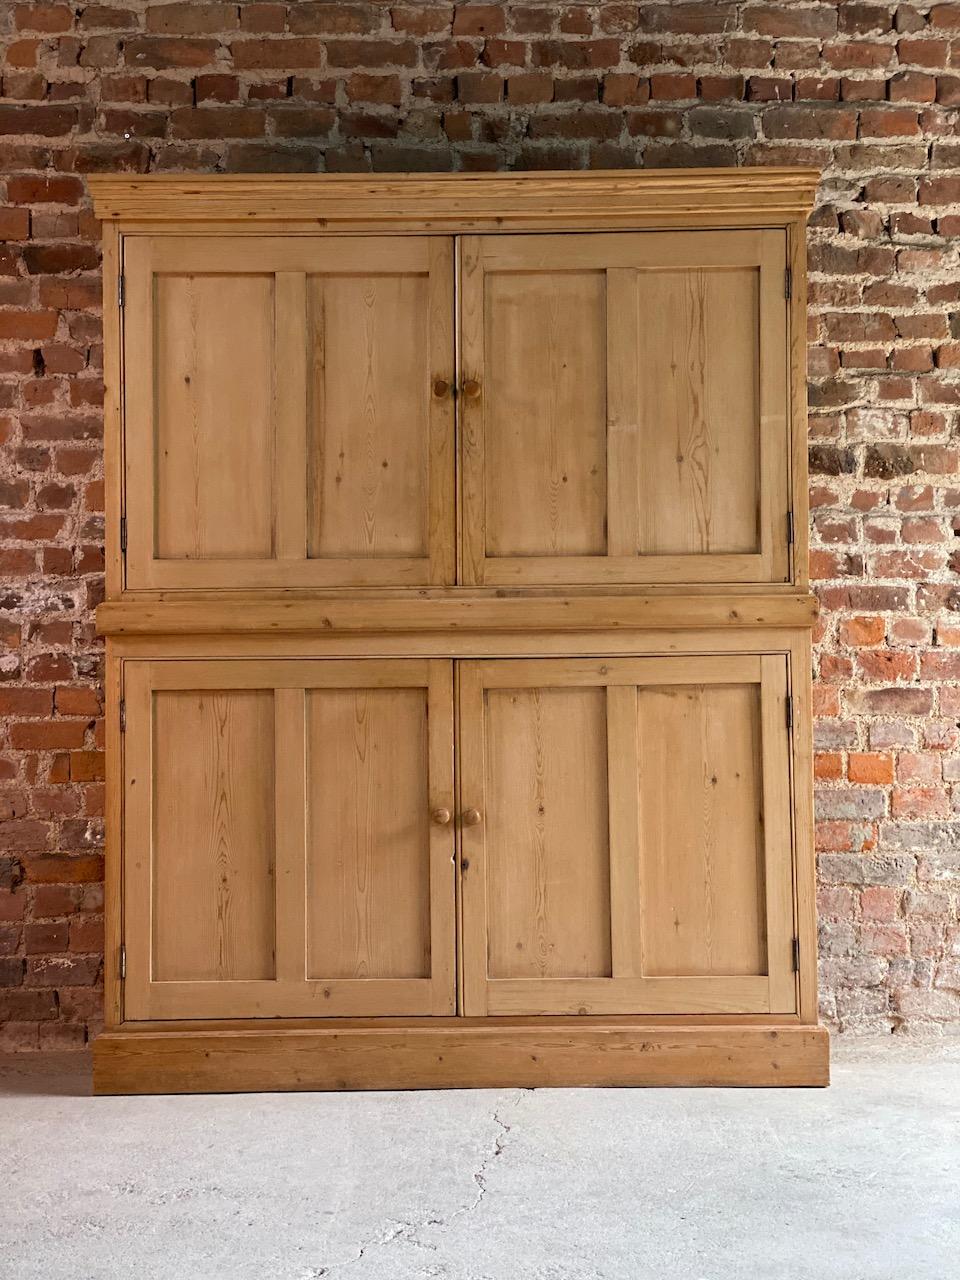 Antique pine school cupboard pantry, early 20th century

A magnificent early 20th century English solid pine school house cupboard, the rectangular corniced upper section over two paneled doors, the interior with shaped pelmet, divided in two